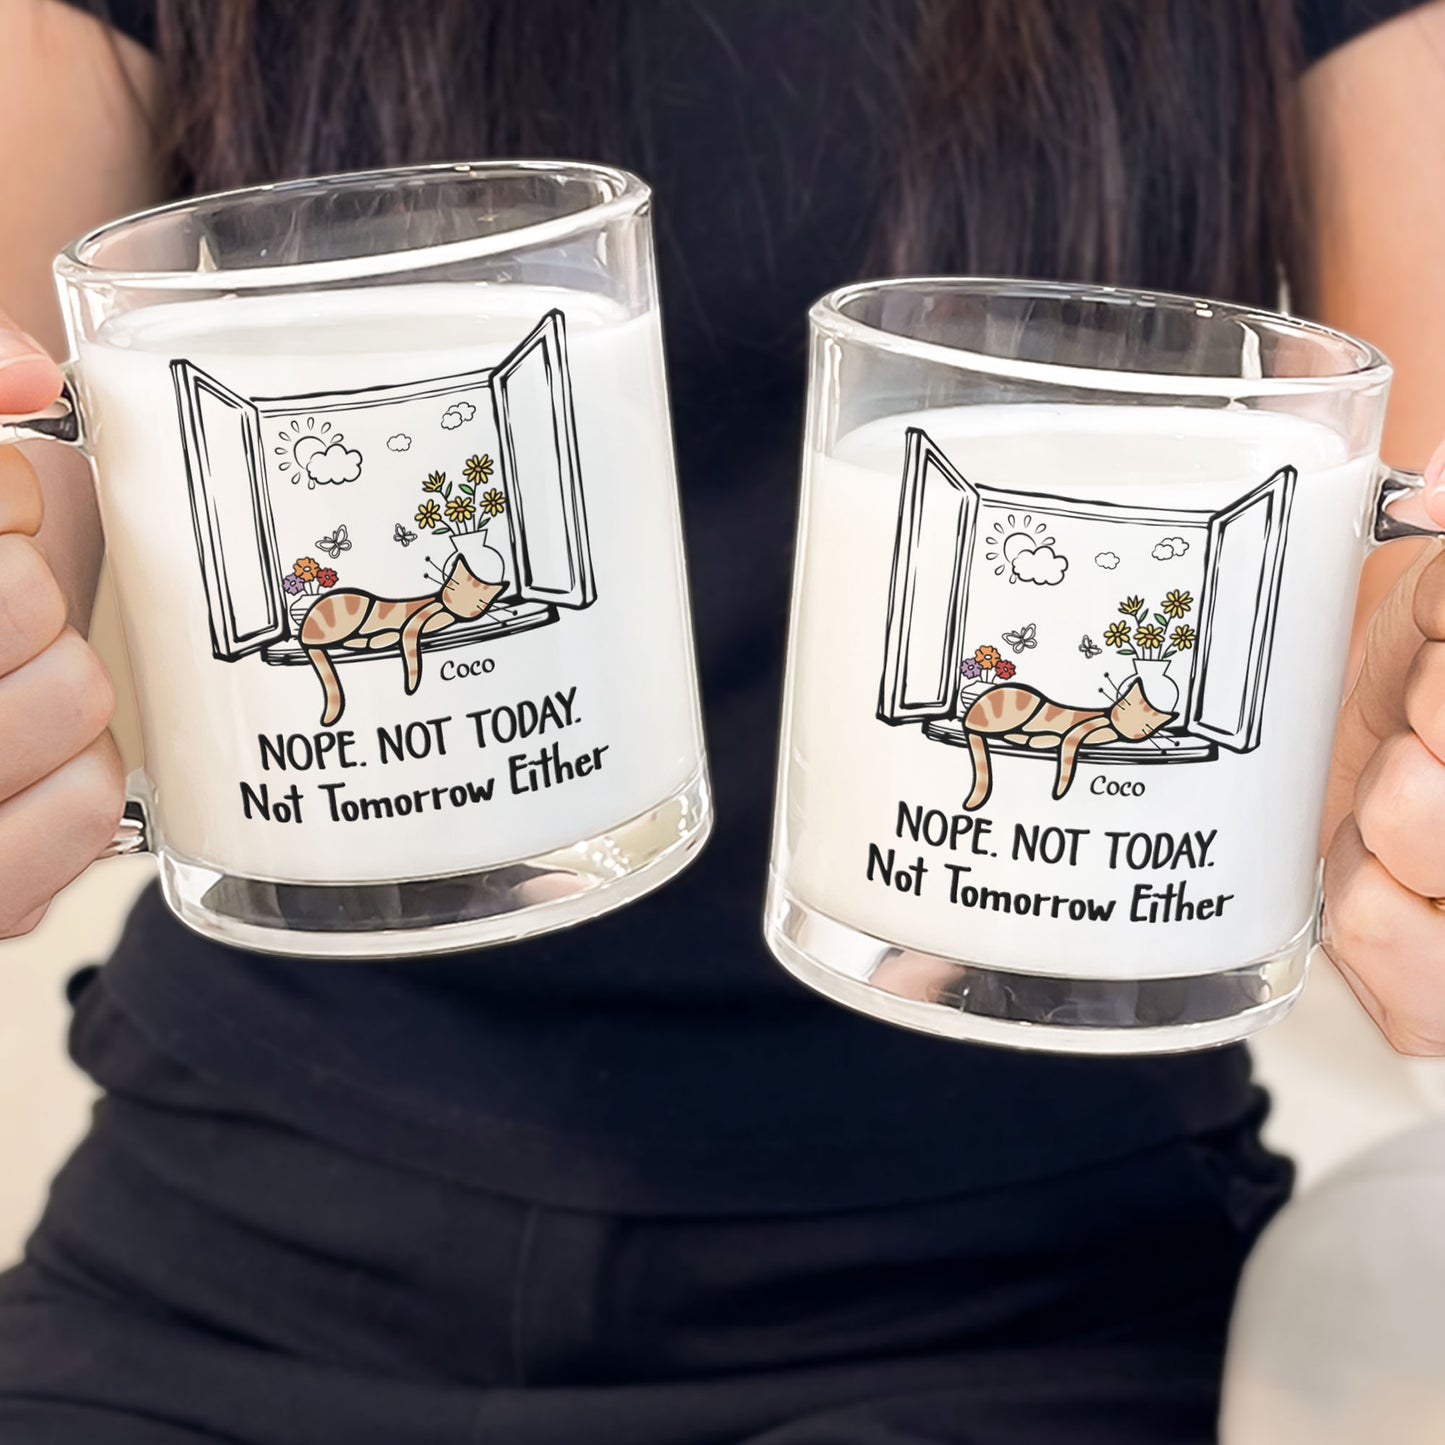 Nope. Not Today. - Personalized Glass Mug